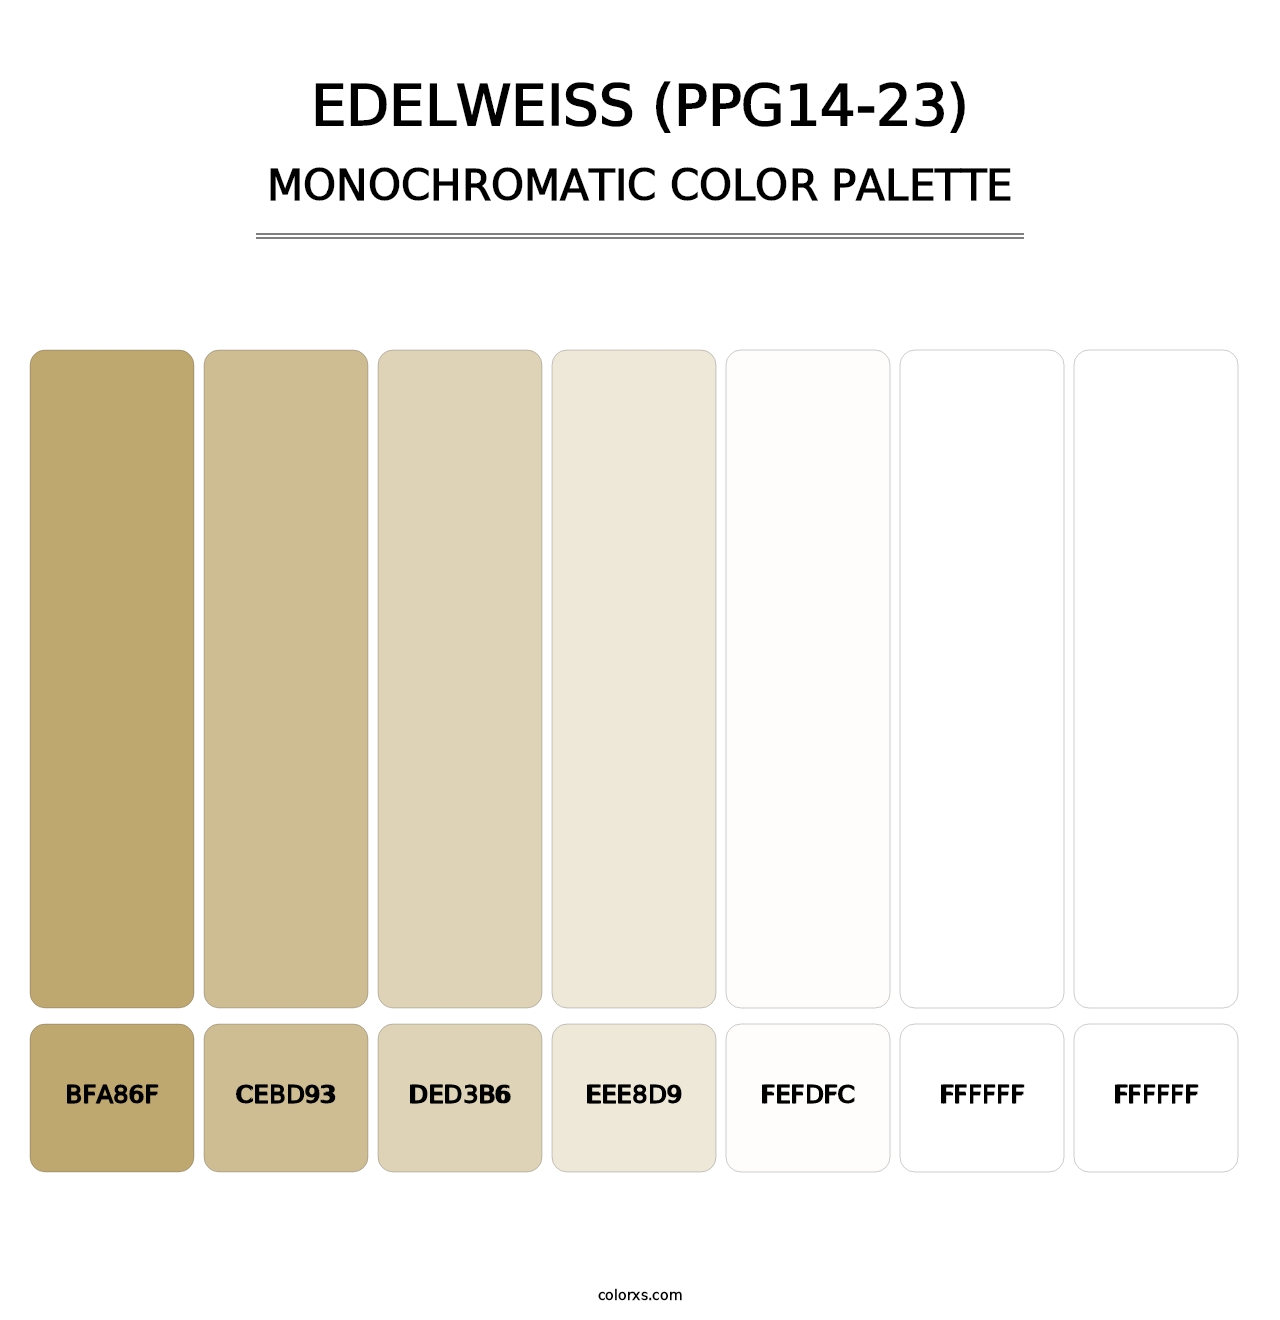 Edelweiss (PPG14-23) - Monochromatic Color Palette